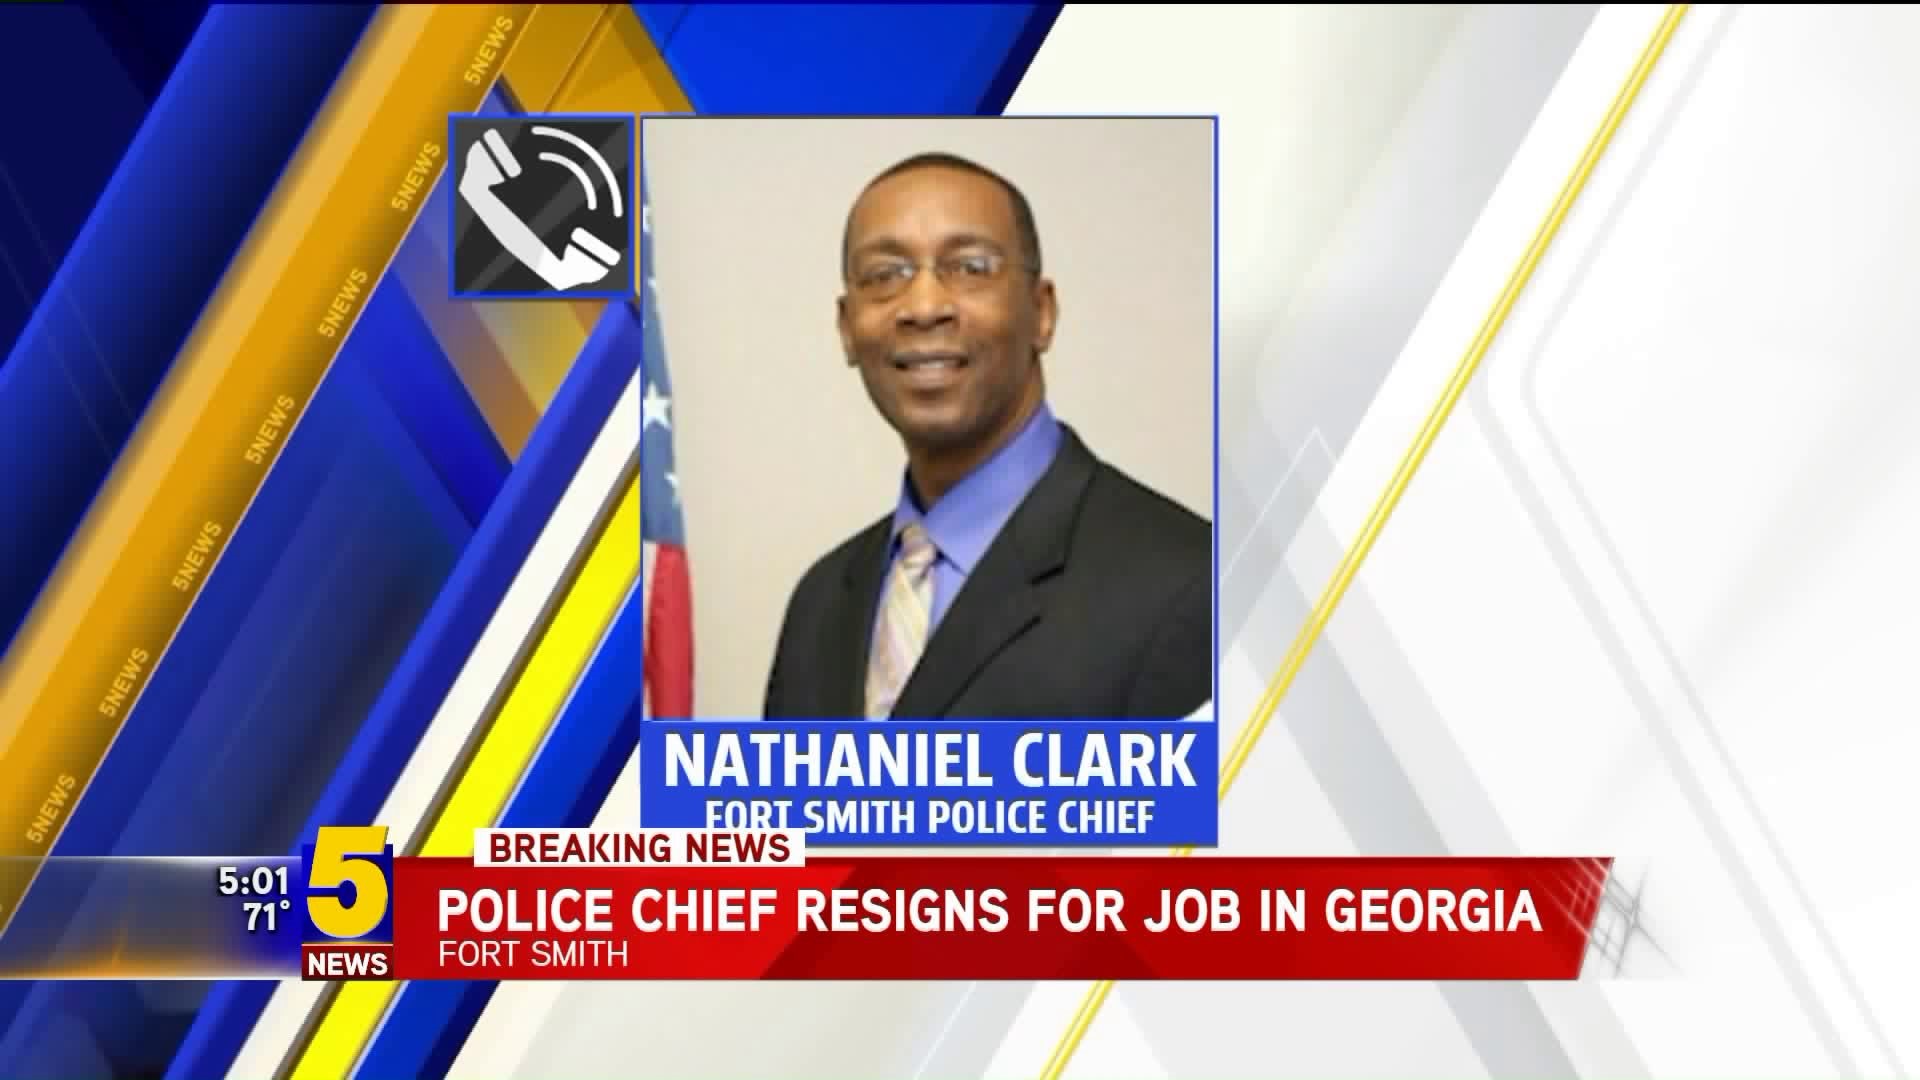 Fort Smith Police Chief Resigns For Job In Georgia